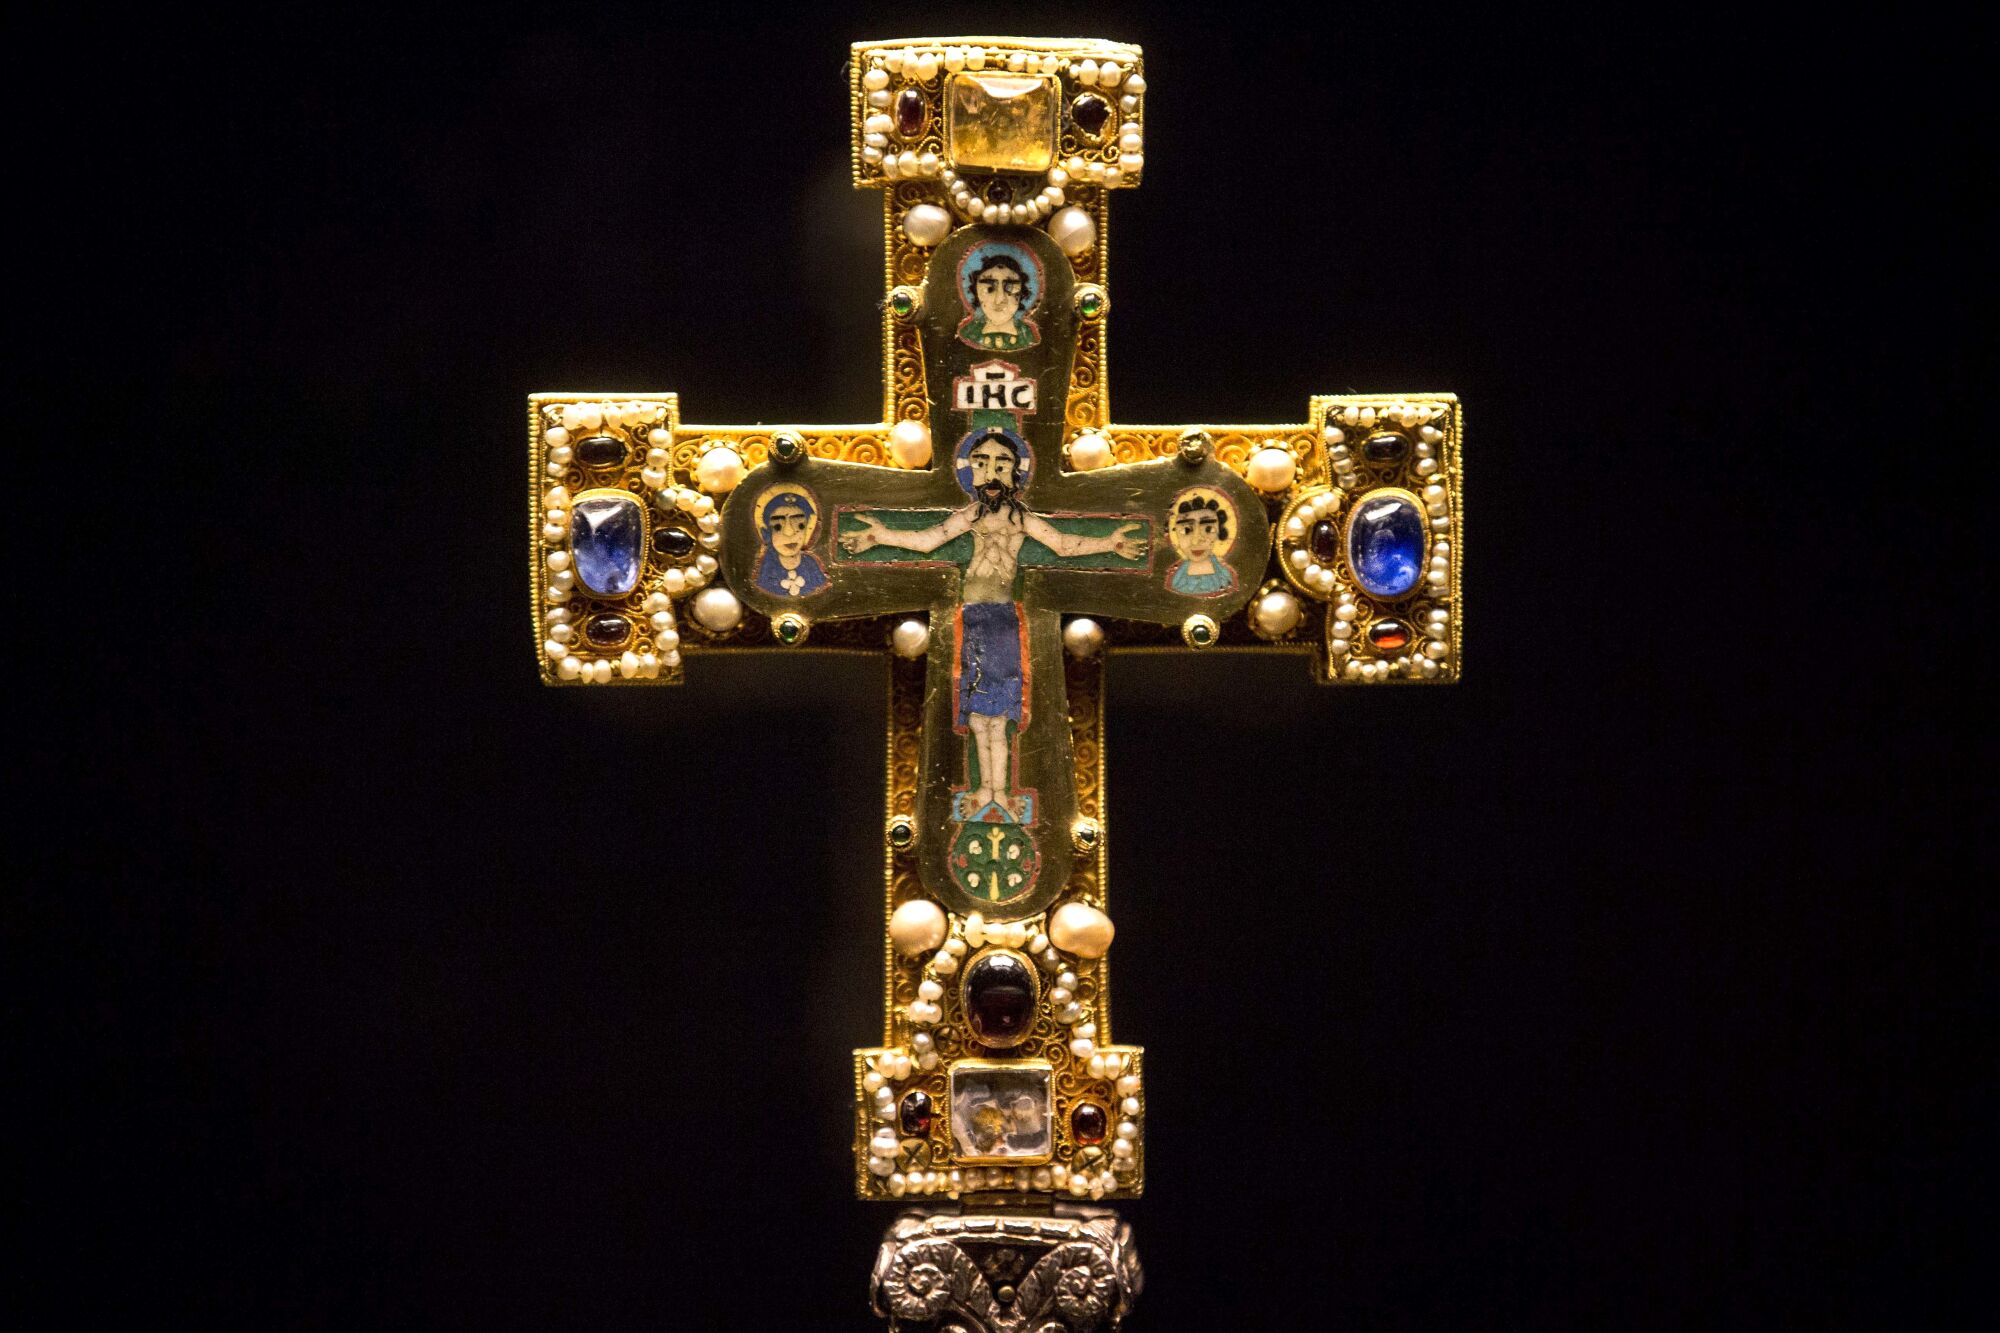 A medieval cross, part of  the Guelph Treasure collection, is displayed at the Bode Museum in Berlin